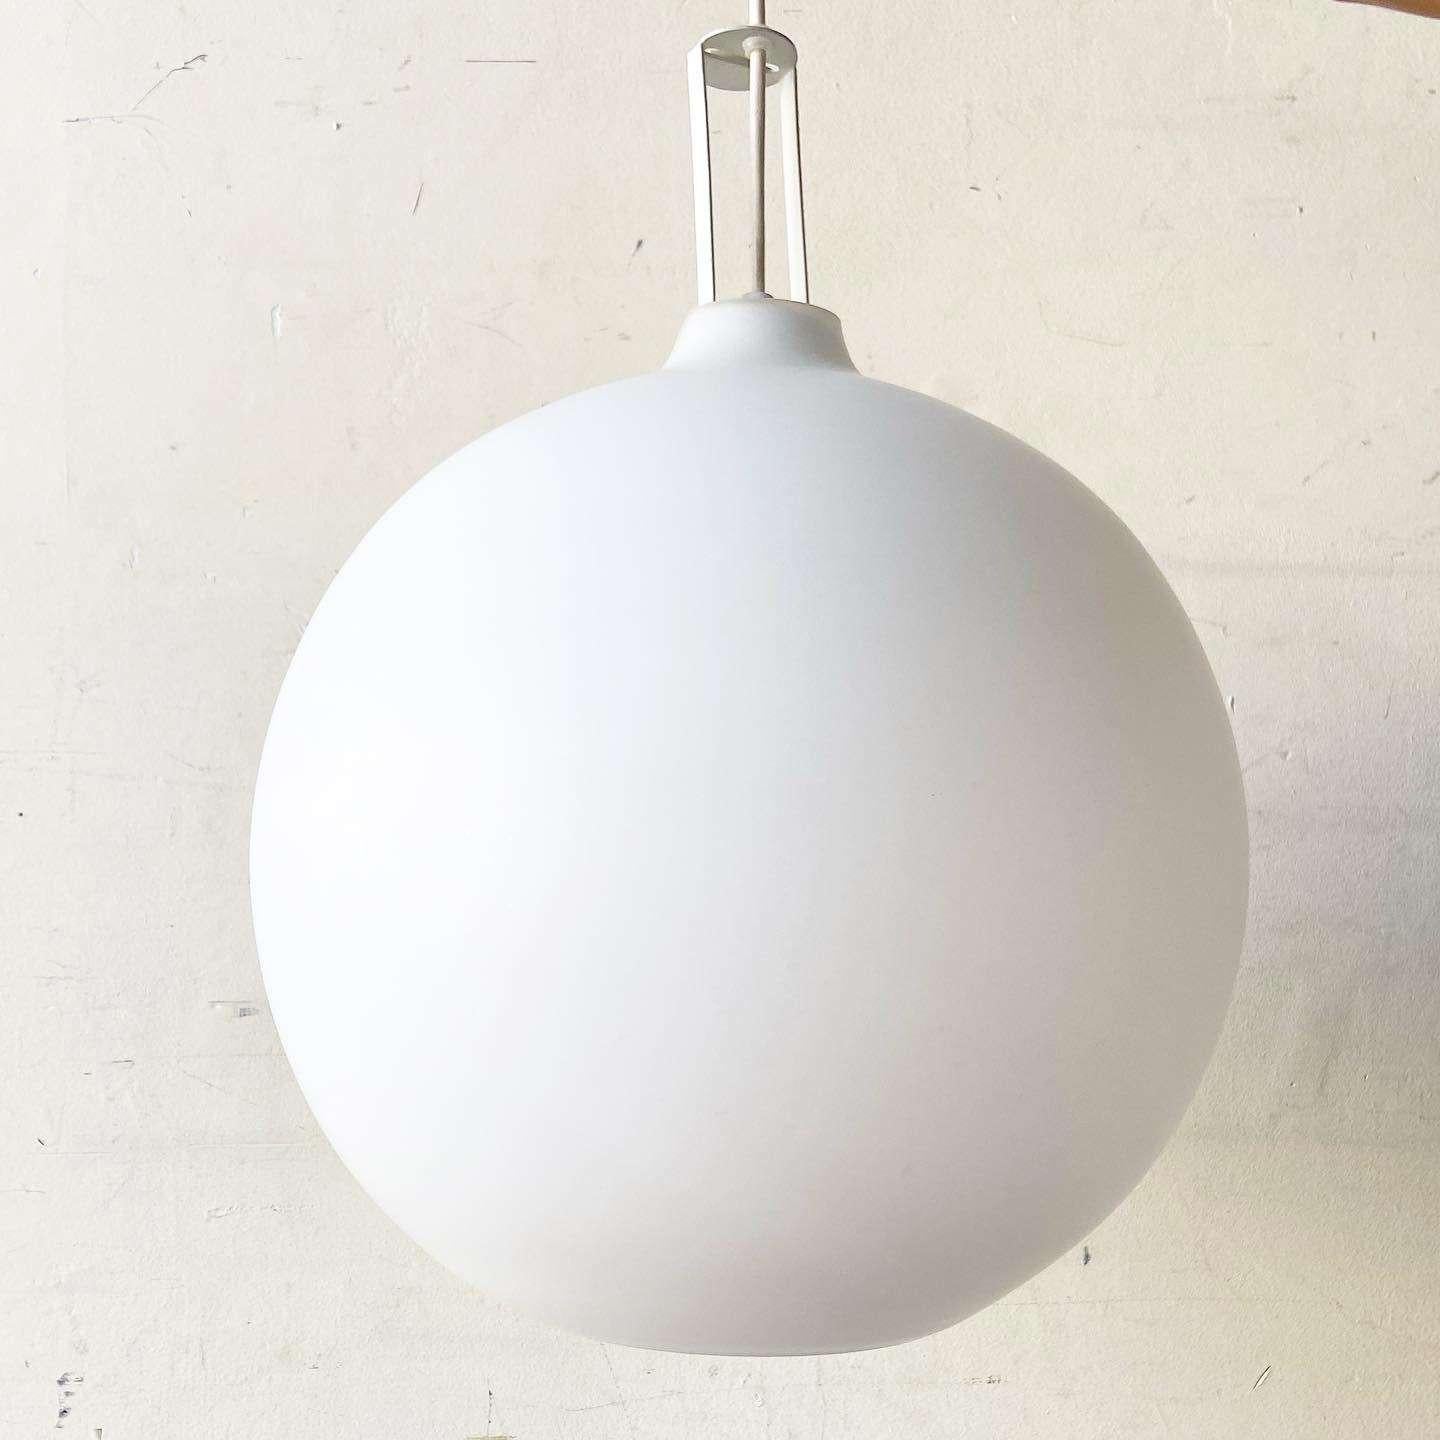 Incredible vintage mid century modern pendant lamp. Features a wonderful smooth white spherical shape.